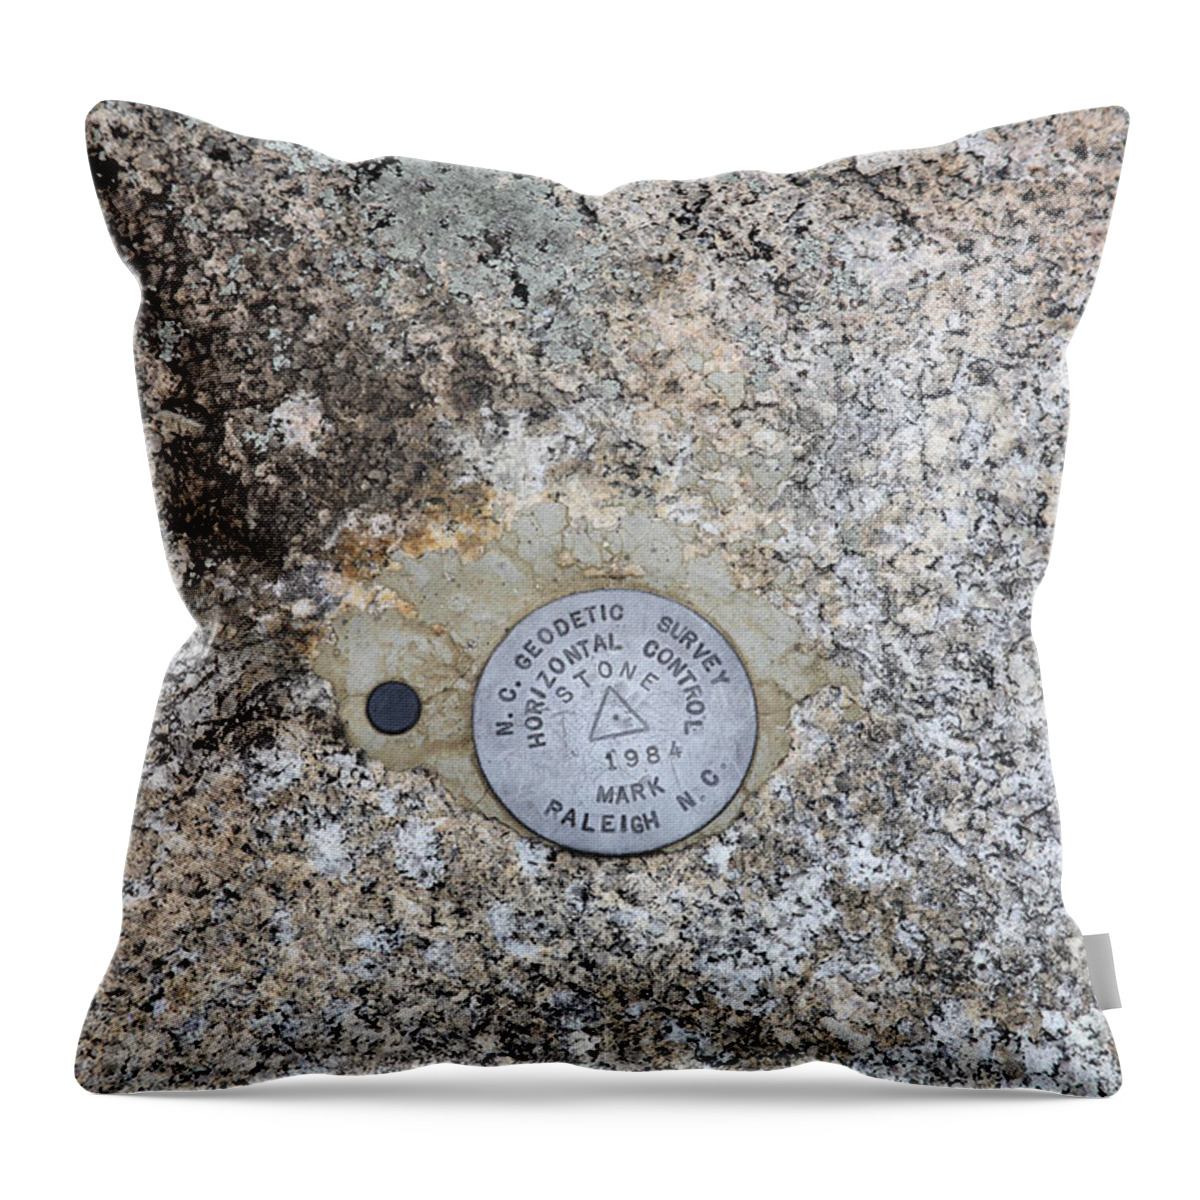 Geological Marker Throw Pillow featuring the photograph Geological Marker by Ted Kinsman